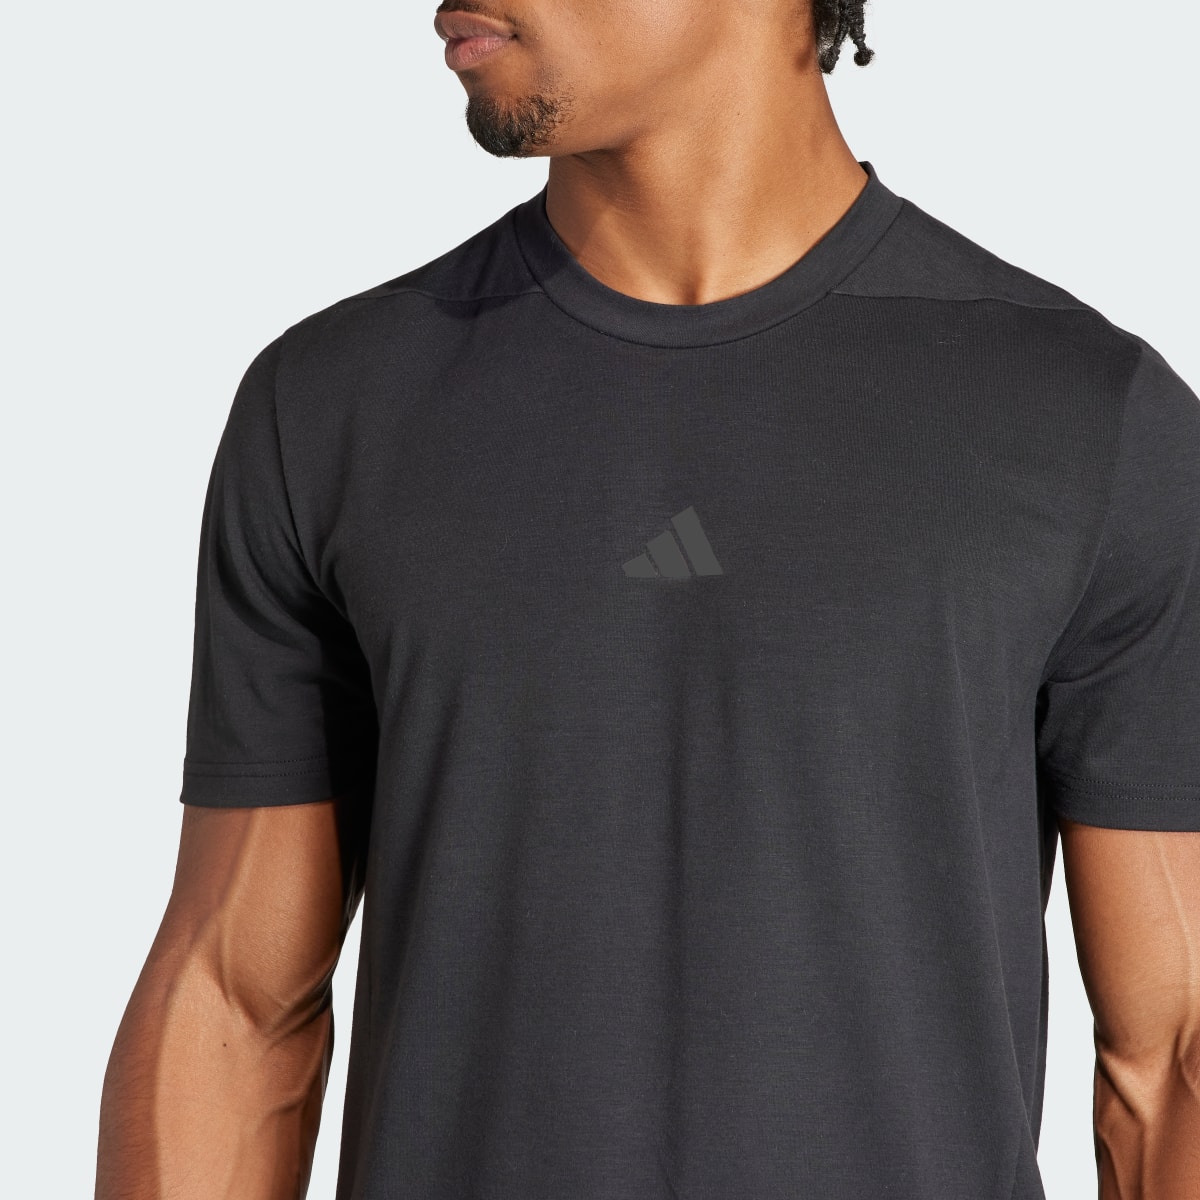 Adidas Designed for Training Workout Tee. 6